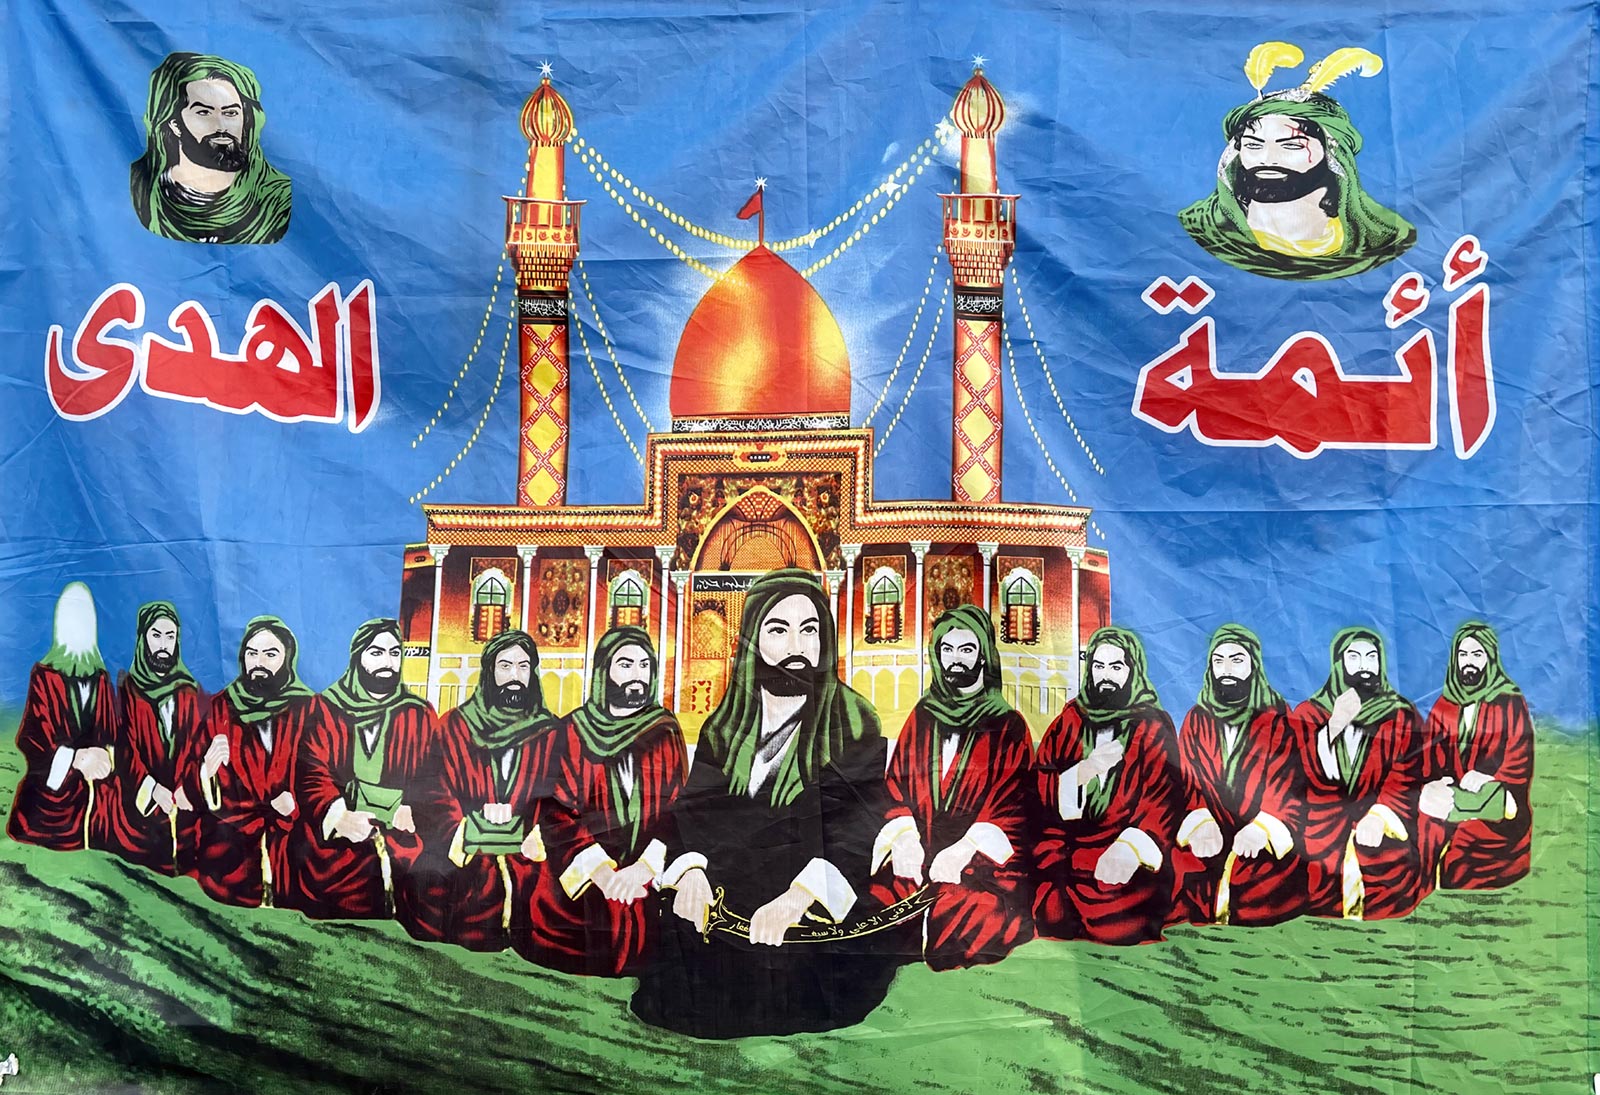 Painting of Twelve Shia Imams, with Imam Ali in center